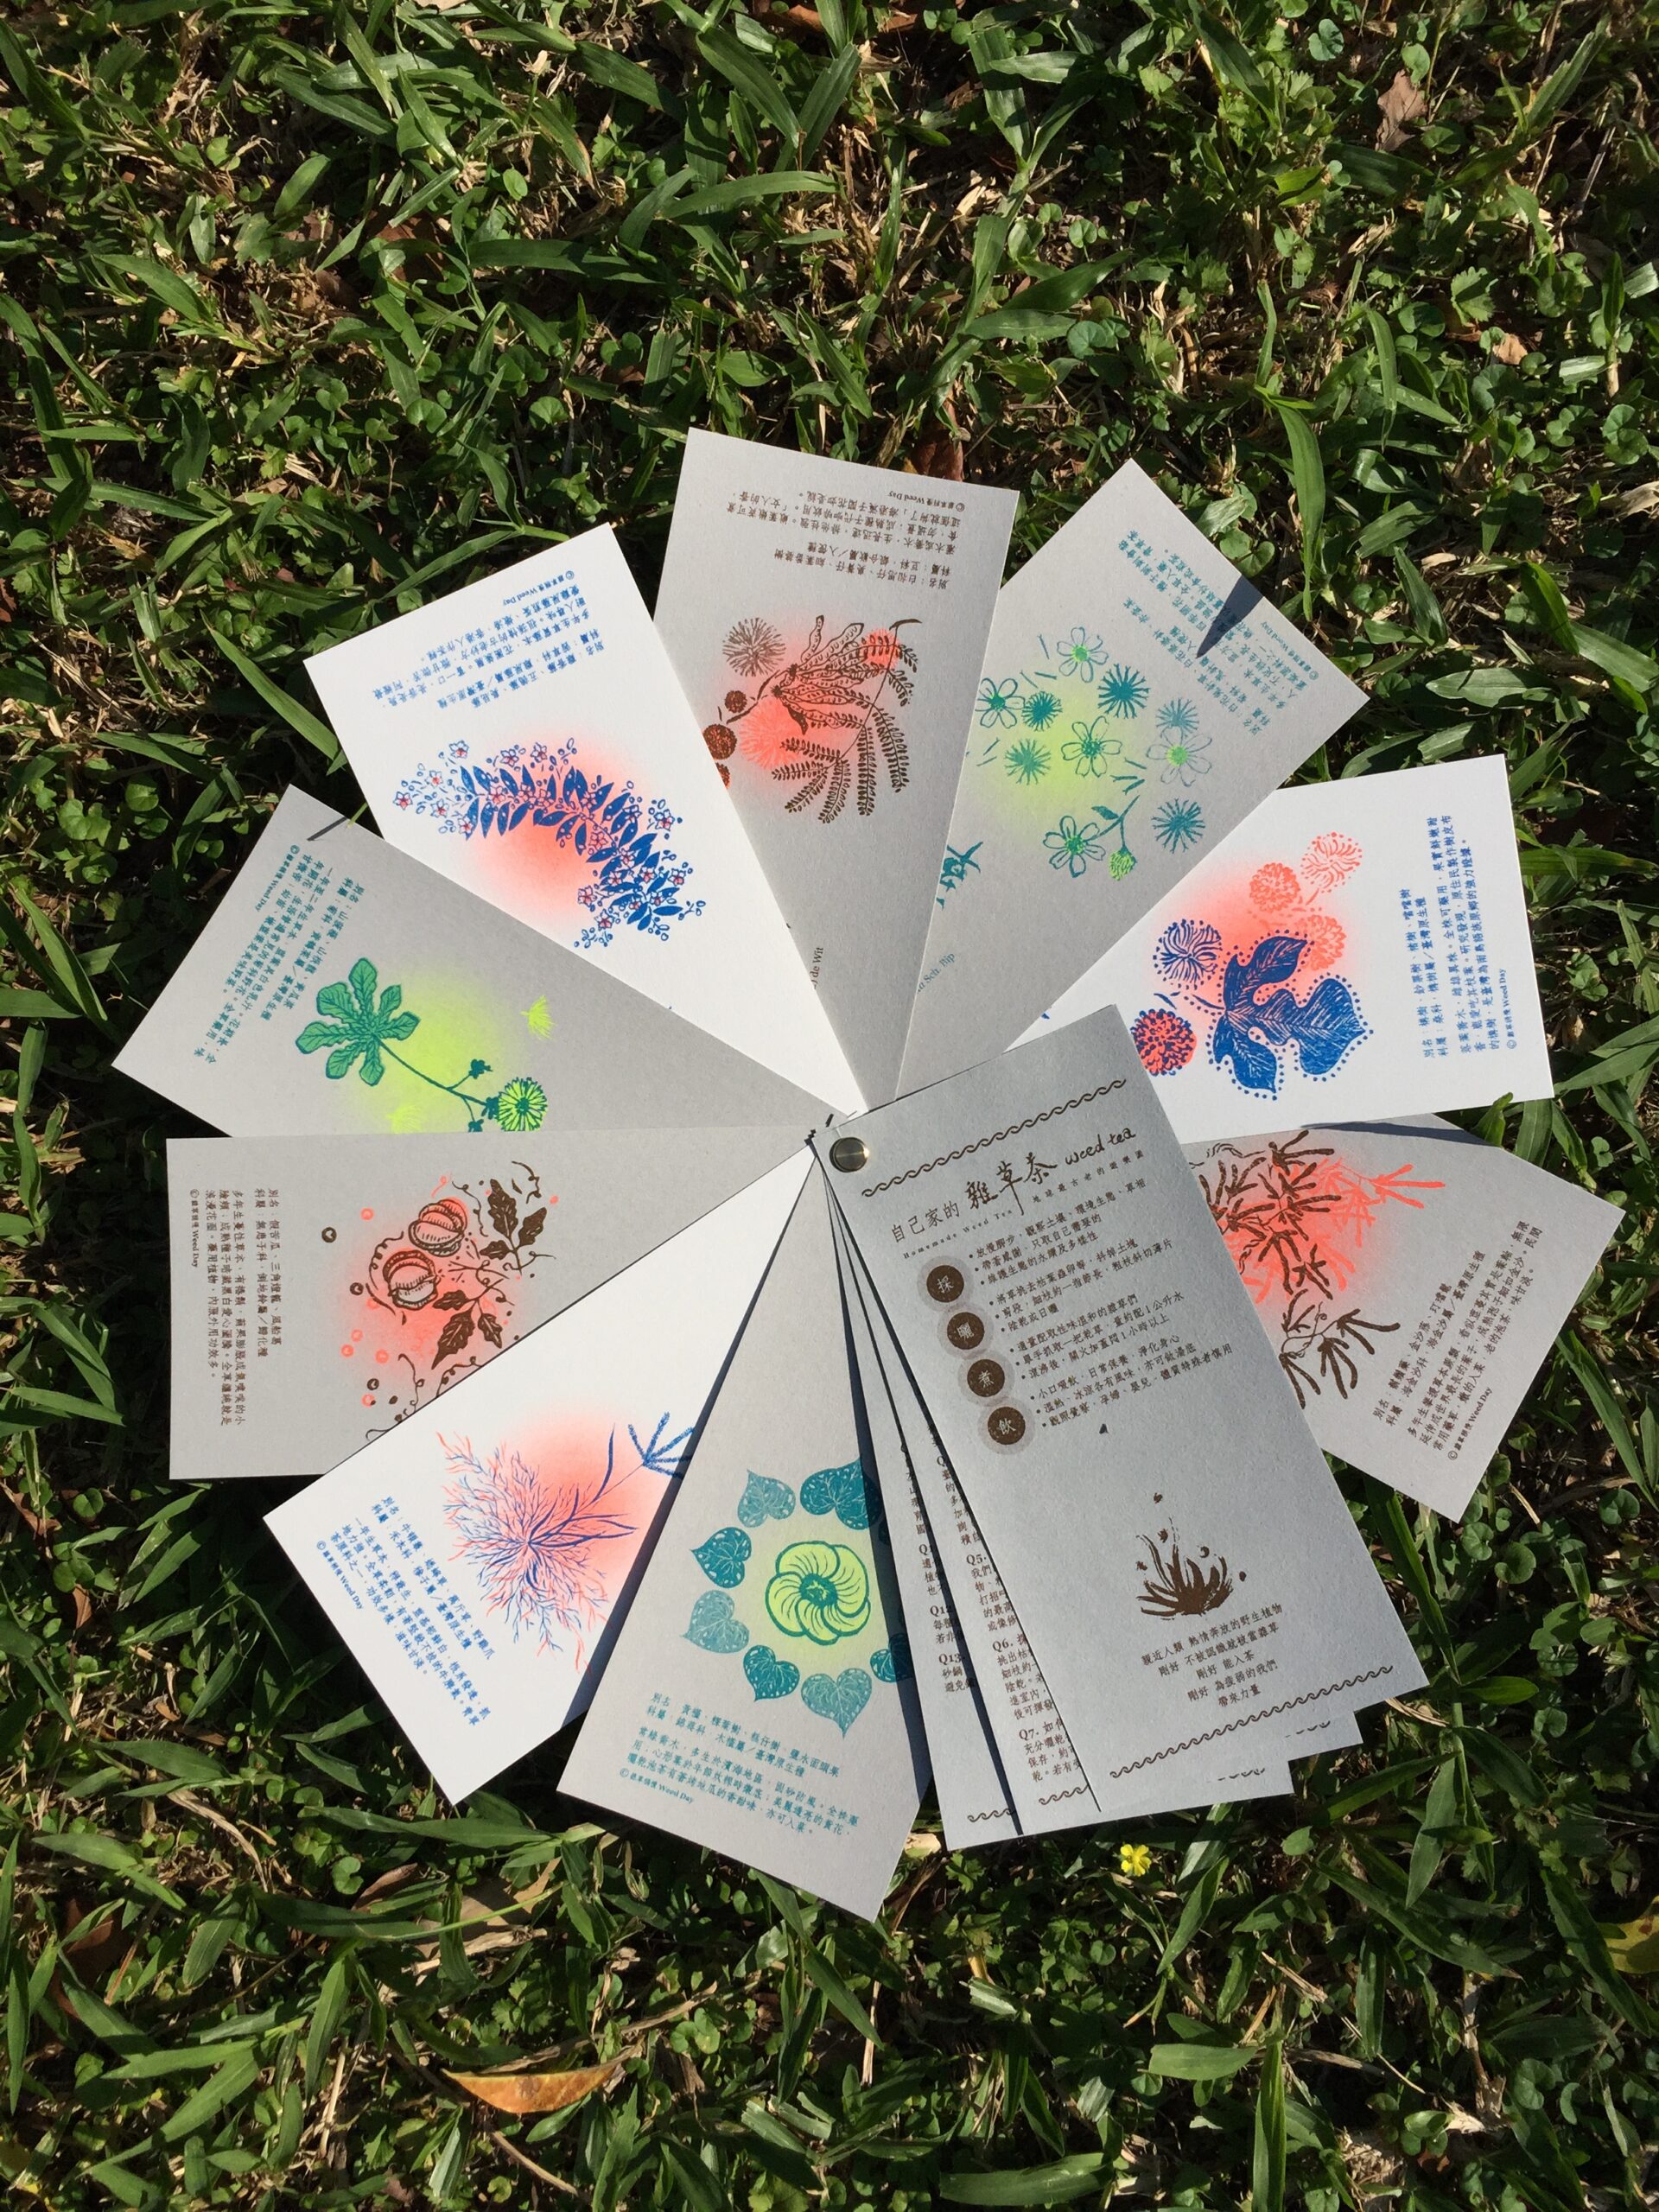 A silver and white zine with floral designs is fanned out across a grass background.